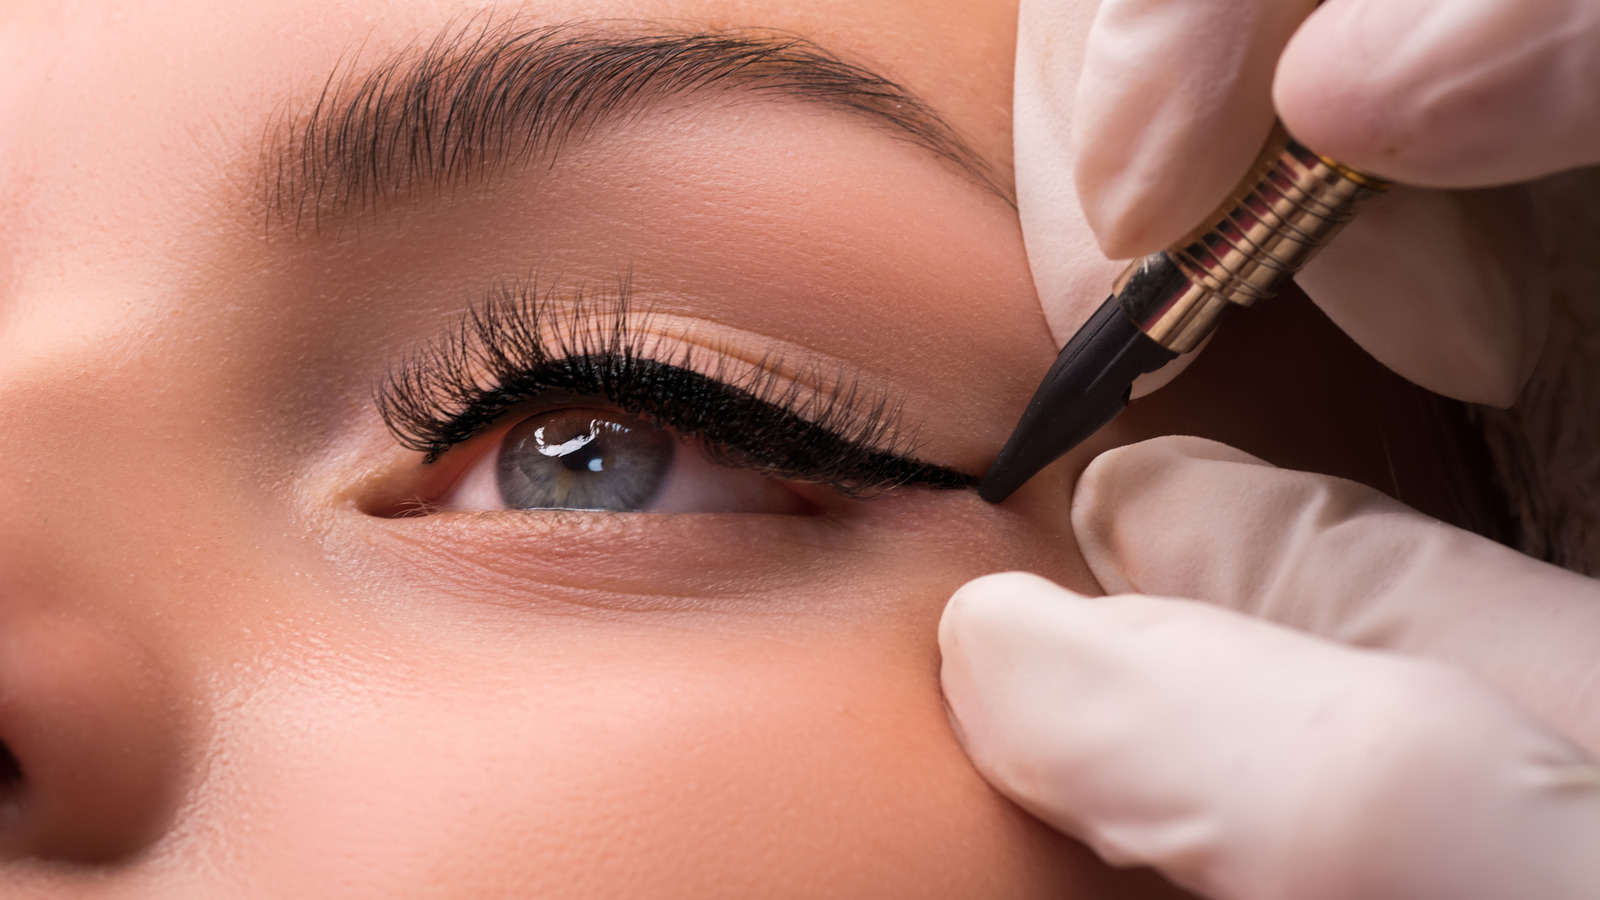 Eyeliner Tattoos Are The New Beauty Statement – Here’s Why